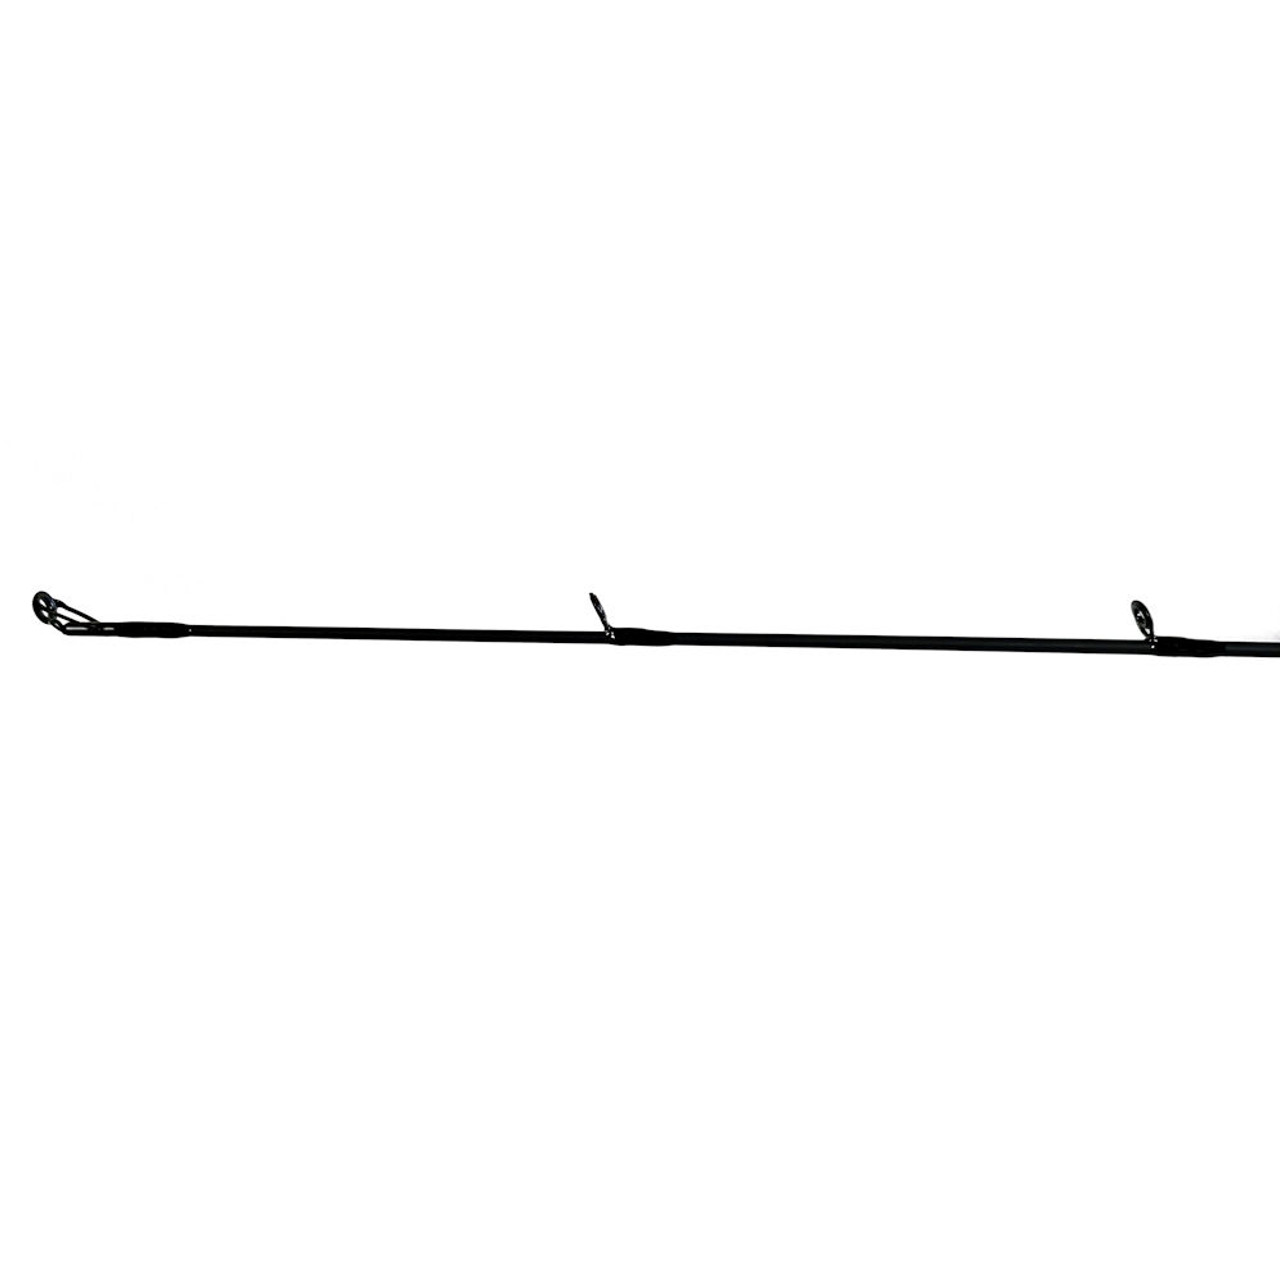 S.I.R. ENGINEERED FISHING TACKLE 6 FOOT 7 INCH 25-60# CONVENTIONAL